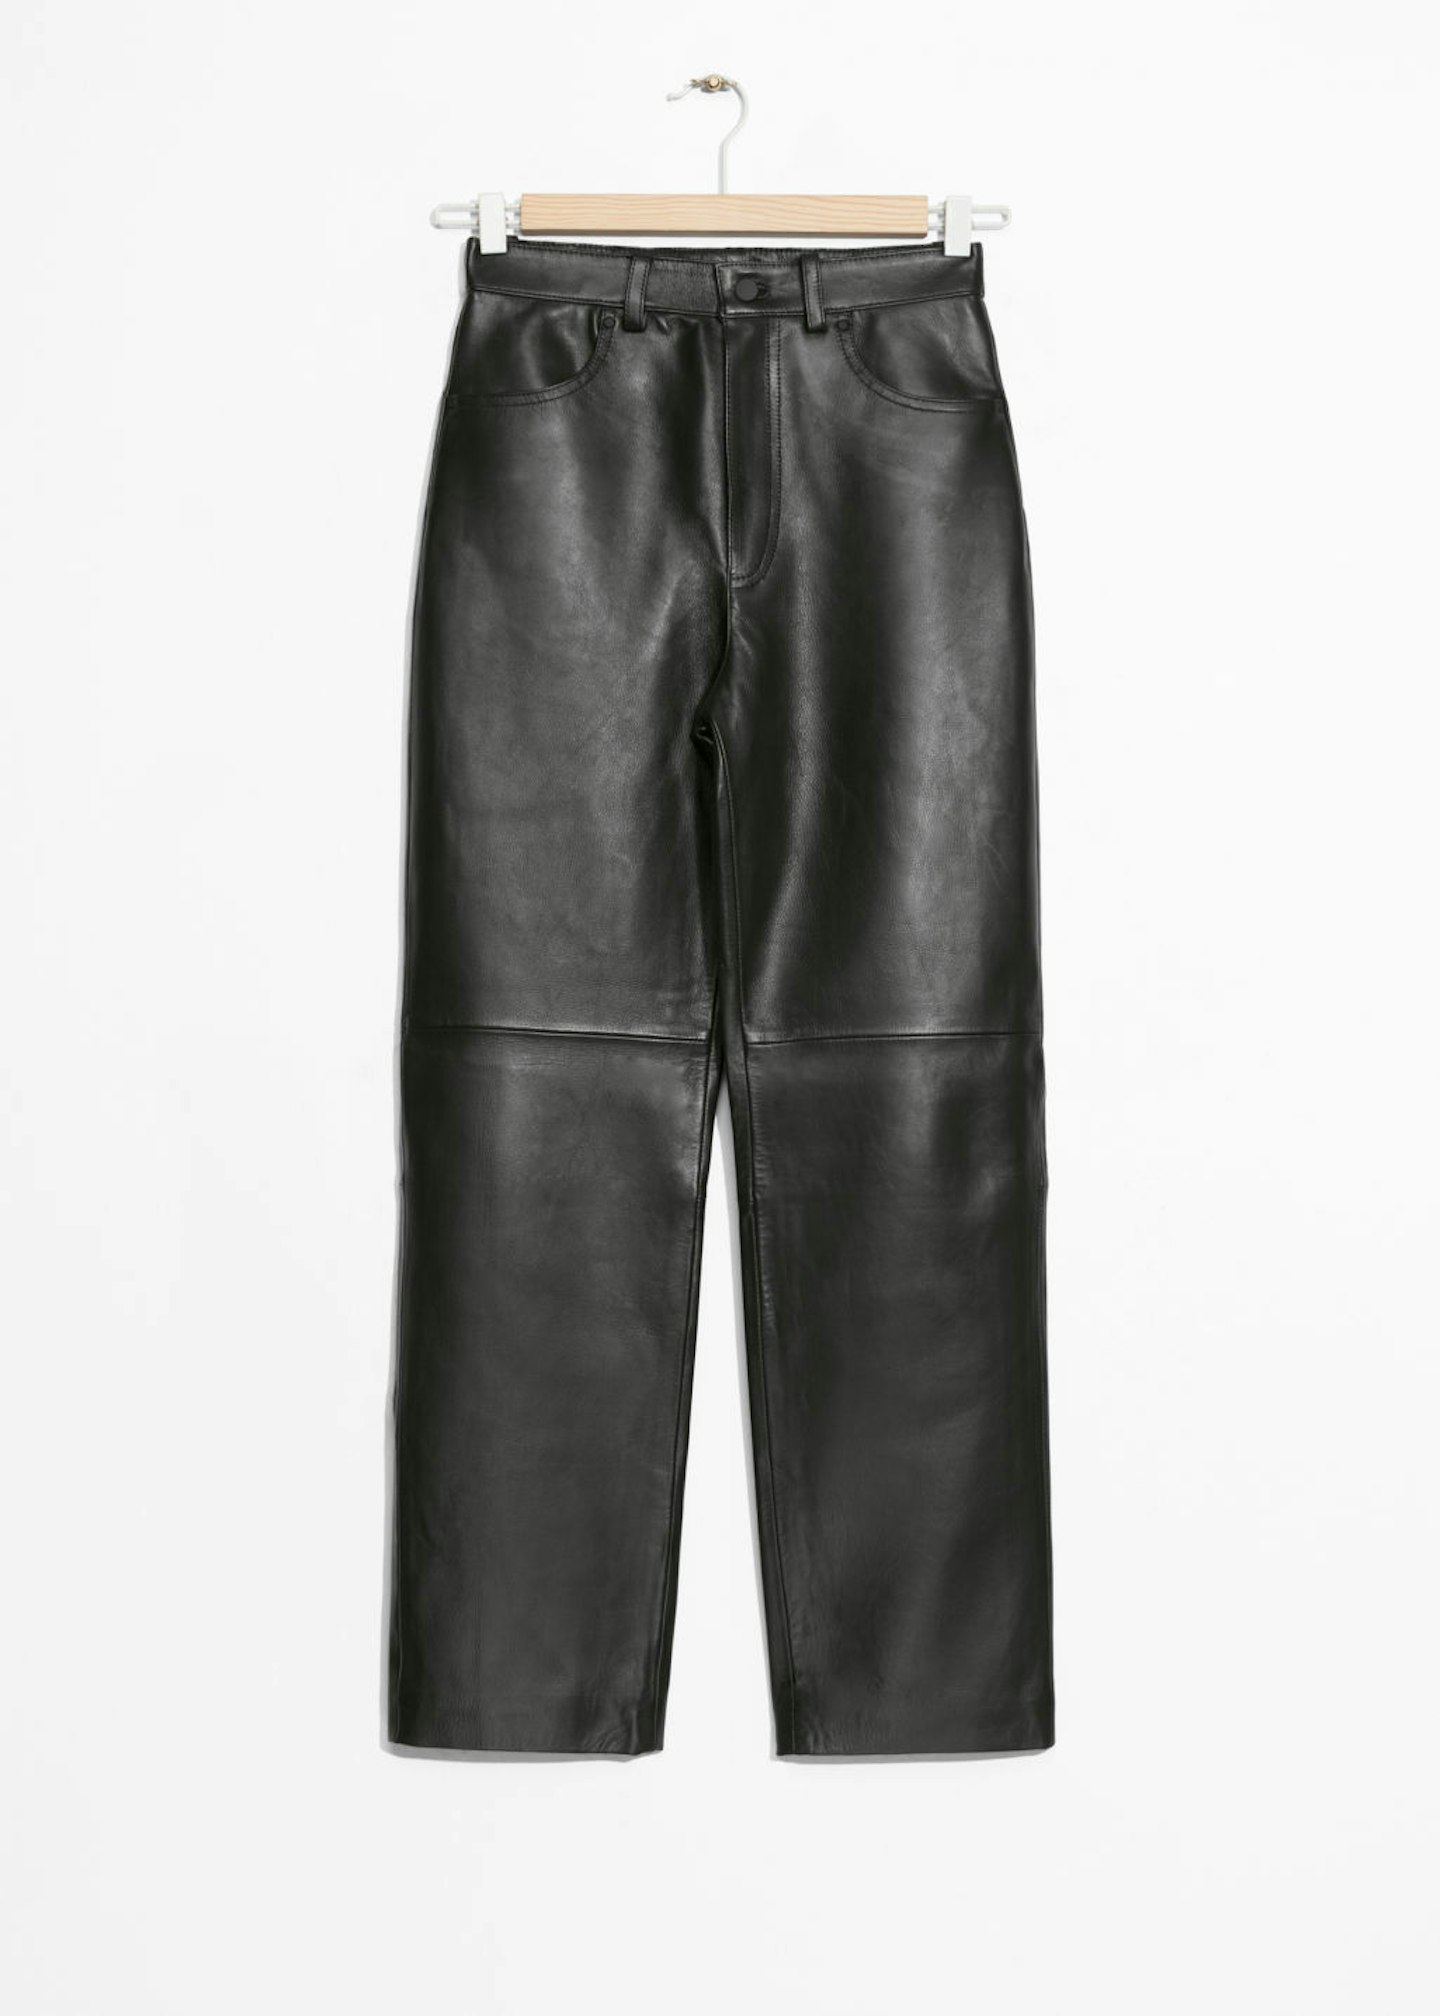 & Other Stories, Leather Trousers, £255